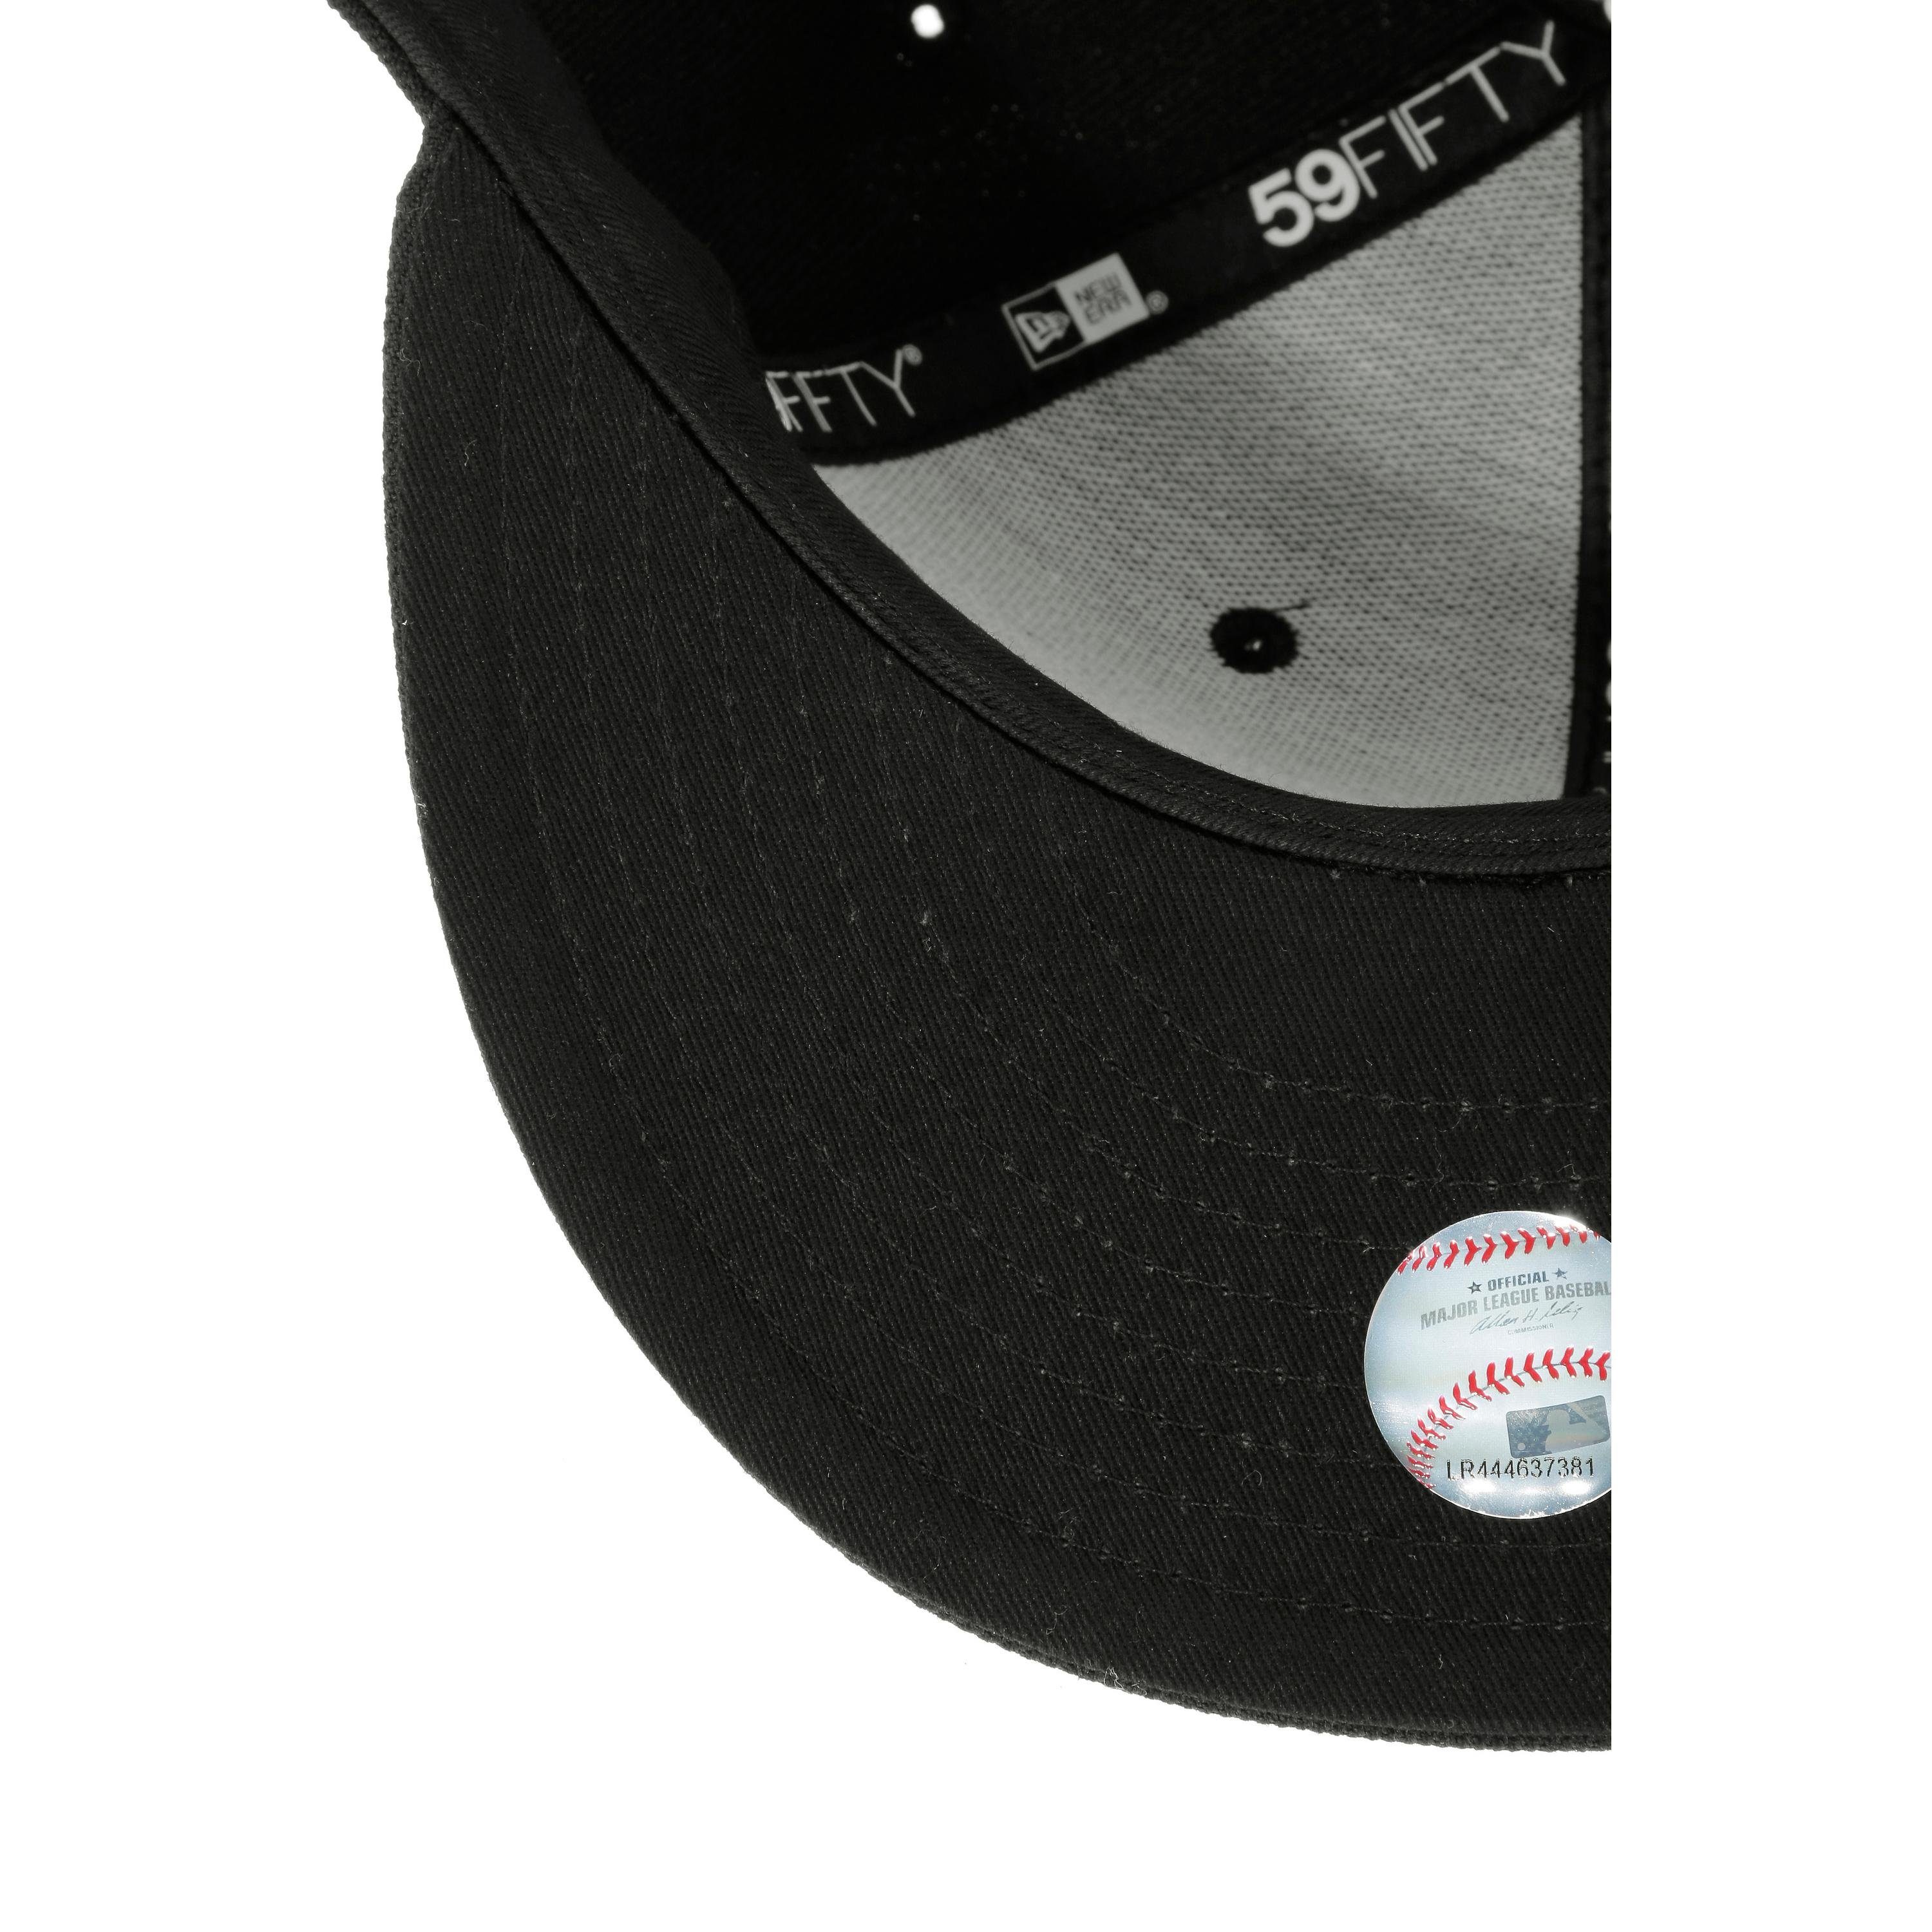 Yankees Fitted Cap 59fifty Era New NY schwarz